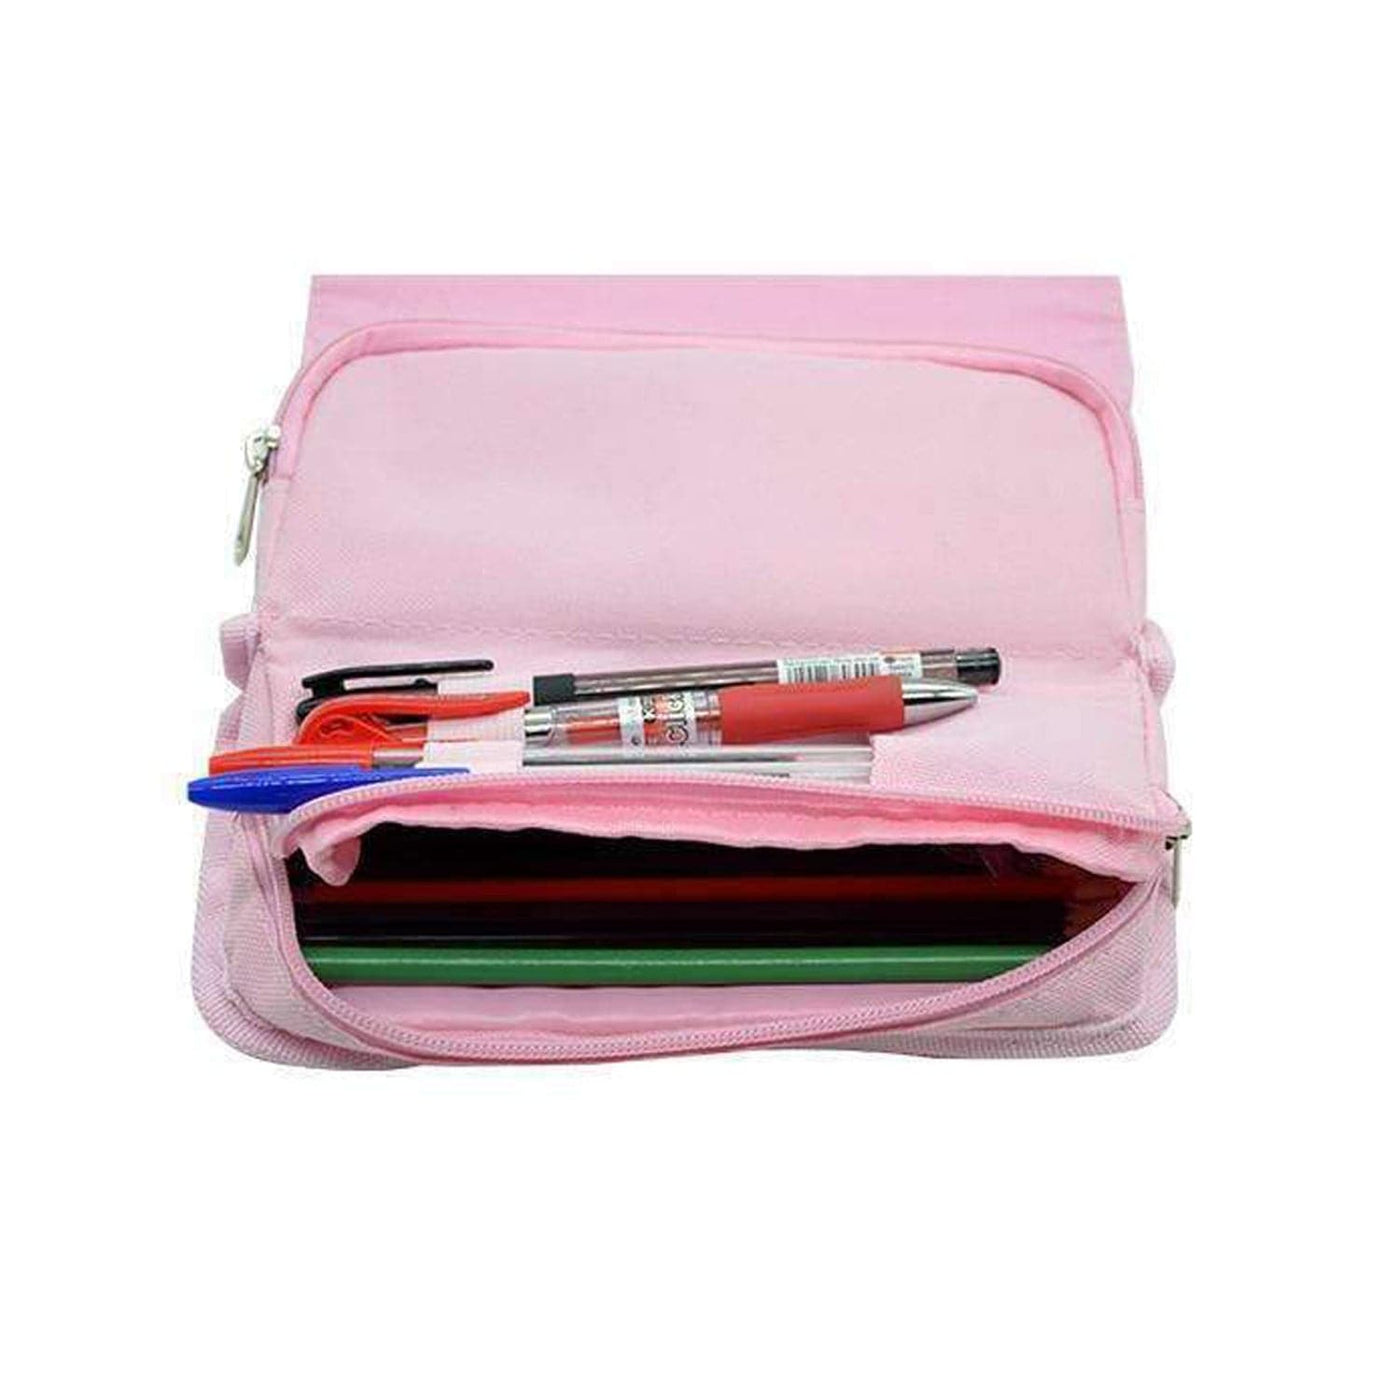 Climb Up On A Moon For You - Sex Education Pencil Case